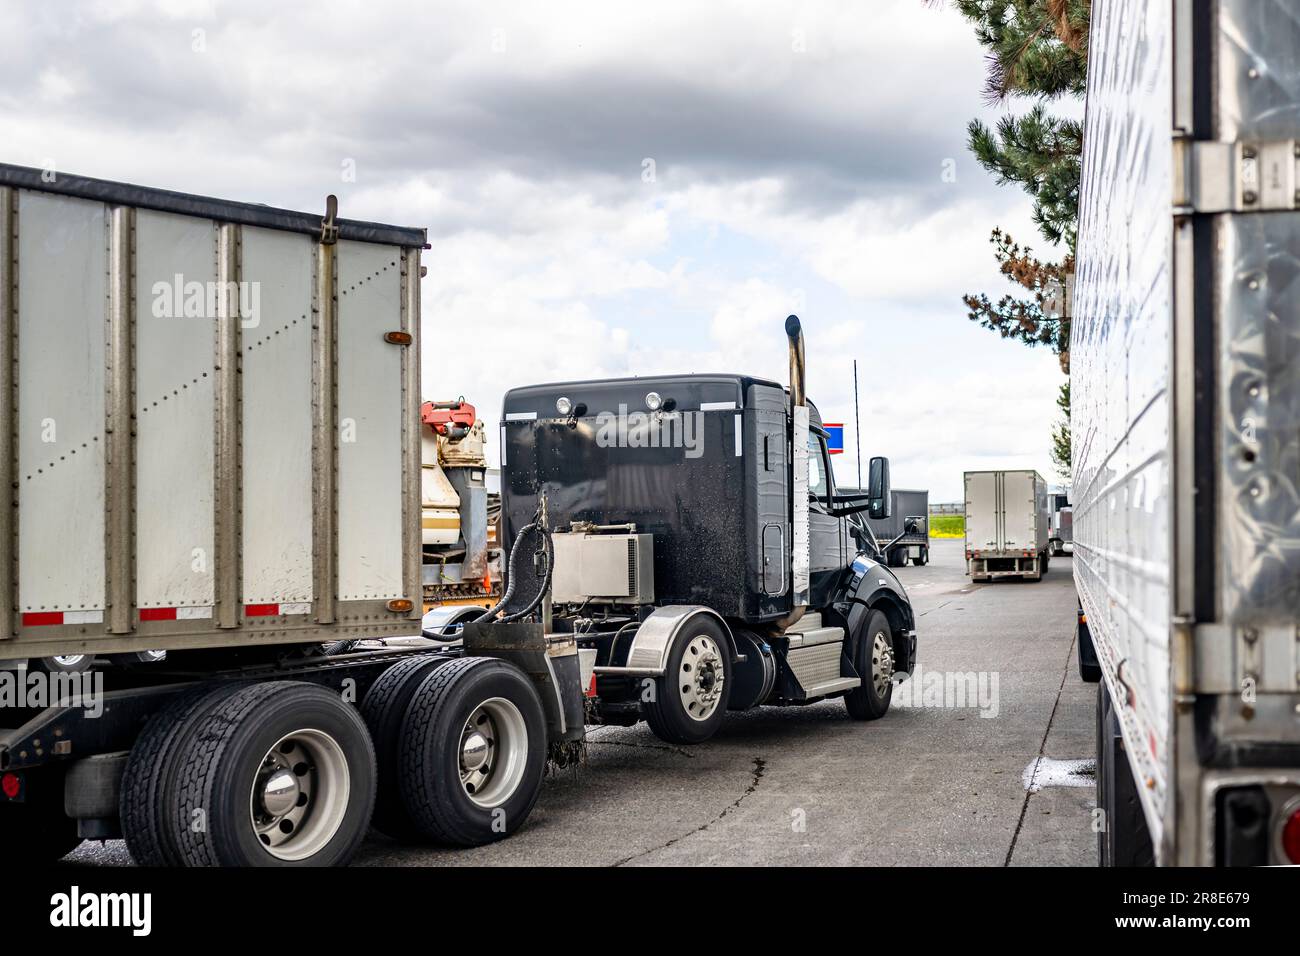 Industrial powerful black big rig classic American bonnet day cab semi truck tractor with bulk semi trailer moving to truck stop parking lot exit with Stock Photo